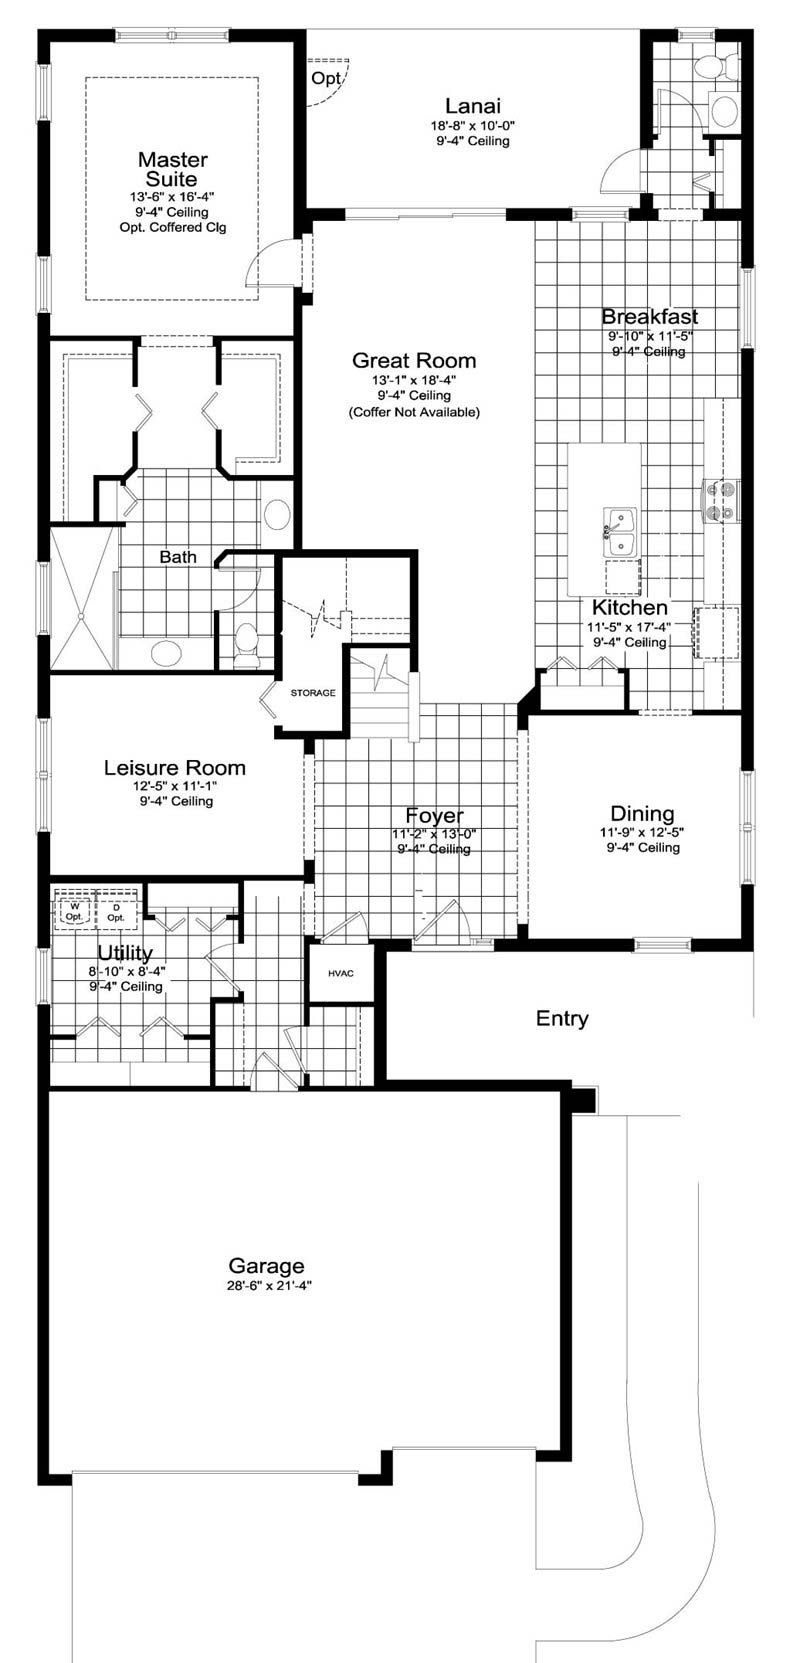 Silver Mist 3 Floor Plan in Reflection Lakes, Naples by Neal Communities, 4 Bedrooms, 3.5 Bathrooms, 3 Car garage, 2,913 Square feet, 2 Story home